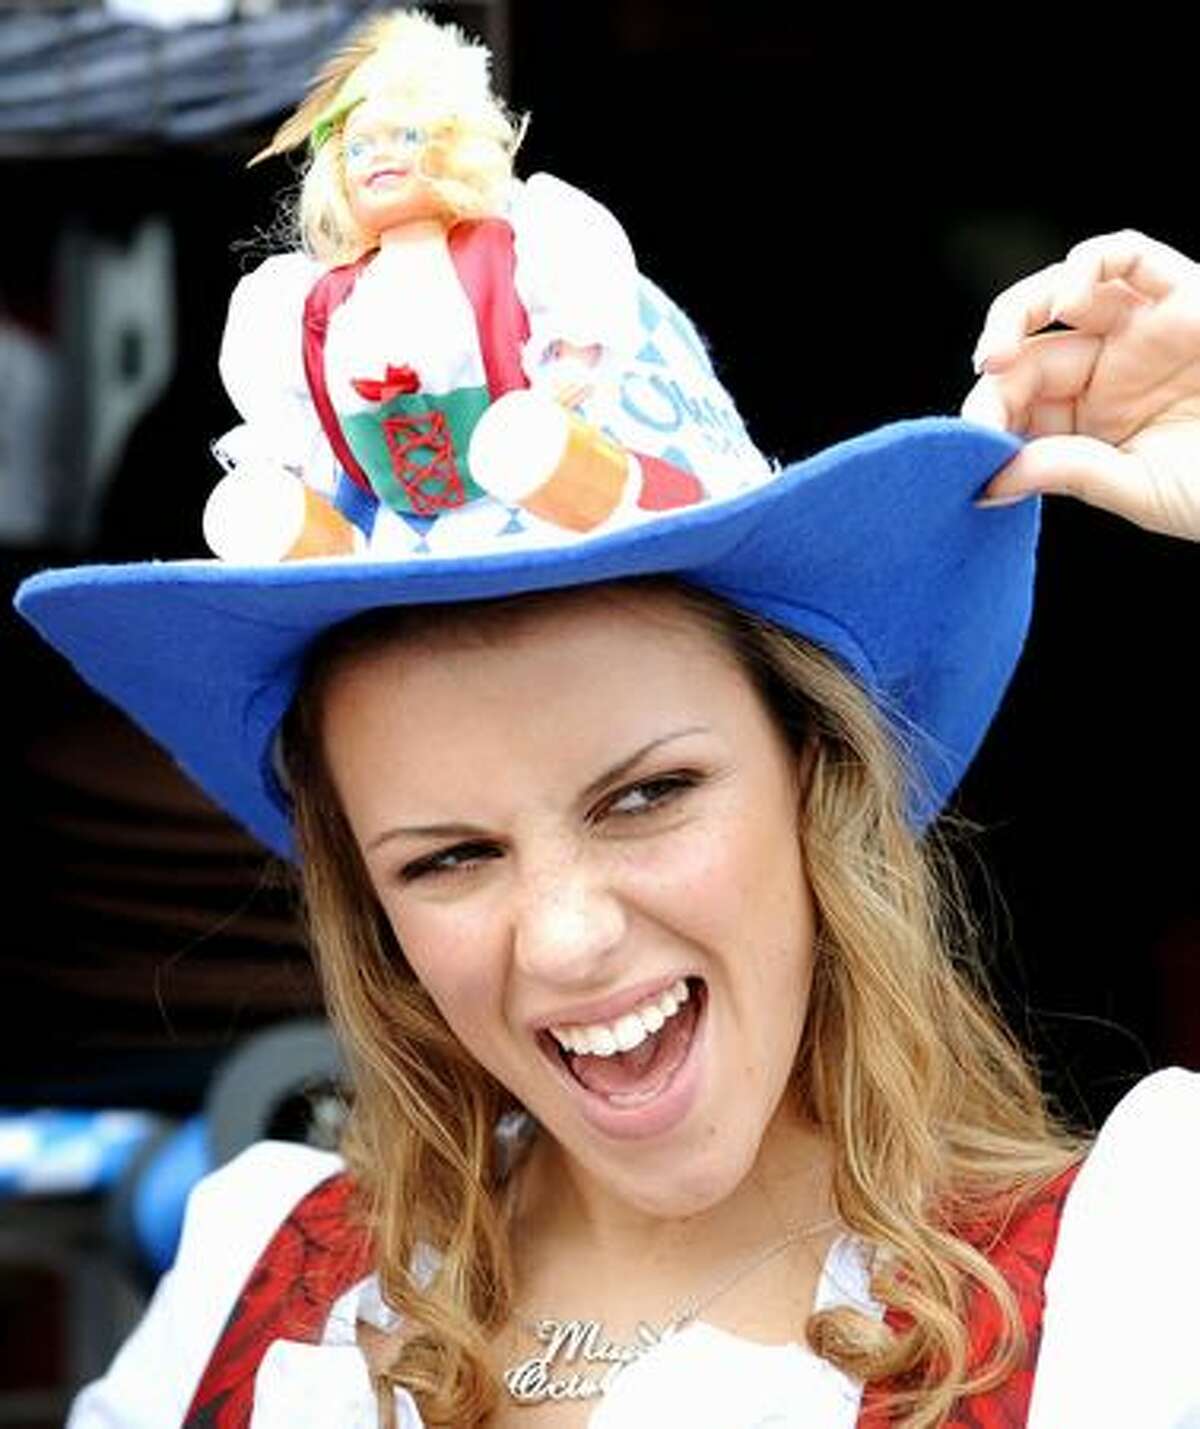 A women gestures during the Oktoberfest beer festival at the "Theresienwiese" in Munich, southern Germany.